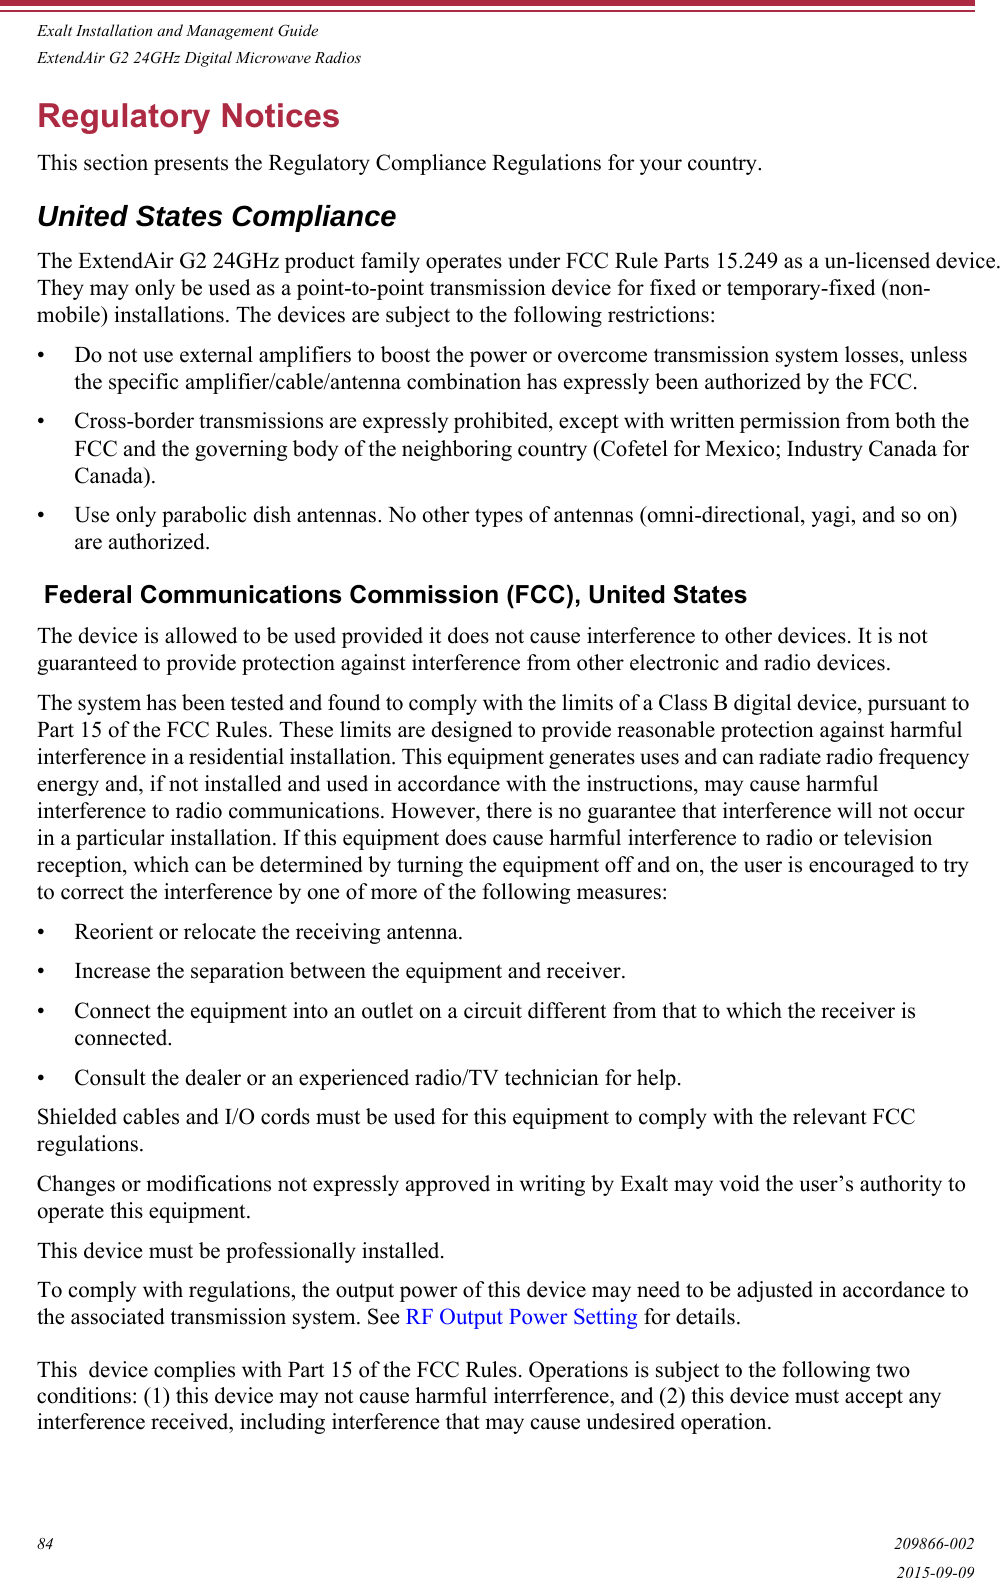 Exalt Installation and Management GuideExtendAir G2 24GHz Digital Microwave Radios84 209866-0022015-09-09Regulatory NoticesThis section presents the Regulatory Compliance Regulations for your country.United States ComplianceThe ExtendAir G2 24GHz product family operates under FCC Rule Parts 15.249 as a un-licensed device. They may only be used as a point-to-point transmission device for fixed or temporary-fixed (non-mobile) installations. The devices are subject to the following restrictions:• Do not use external amplifiers to boost the power or overcome transmission system losses, unless the specific amplifier/cable/antenna combination has expressly been authorized by the FCC. • Cross-border transmissions are expressly prohibited, except with written permission from both the FCC and the governing body of the neighboring country (Cofetel for Mexico; Industry Canada for Canada).• Use only parabolic dish antennas. No other types of antennas (omni-directional, yagi, and so on) are authorized.  Federal Communications Commission (FCC), United StatesThe device is allowed to be used provided it does not cause interference to other devices. It is not guaranteed to provide protection against interference from other electronic and radio devices.The system has been tested and found to comply with the limits of a Class B digital device, pursuant to Part 15 of the FCC Rules. These limits are designed to provide reasonable protection against harmful interference in a residential installation. This equipment generates uses and can radiate radio frequency energy and, if not installed and used in accordance with the instructions, may cause harmful interference to radio communications. However, there is no guarantee that interference will not occur in a particular installation. If this equipment does cause harmful interference to radio or television reception, which can be determined by turning the equipment off and on, the user is encouraged to try to correct the interference by one of more of the following measures:• Reorient or relocate the receiving antenna.• Increase the separation between the equipment and receiver.• Connect the equipment into an outlet on a circuit different from that to which the receiver is connected.• Consult the dealer or an experienced radio/TV technician for help.Shielded cables and I/O cords must be used for this equipment to comply with the relevant FCC regulations.Changes or modifications not expressly approved in writing by Exalt may void the user’s authority to operate this equipment.This device must be professionally installed.To comply with regulations, the output power of this device may need to be adjusted in accordance to the associated transmission system. See RF Output Power Setting for details. This  device complies with Part 15 of the FCC Rules. Operations is subject to the following twoconditions: (1) this device may not cause harmful interrference, and (2) this device must accept any interference received, including interference that may cause undesired operation. 